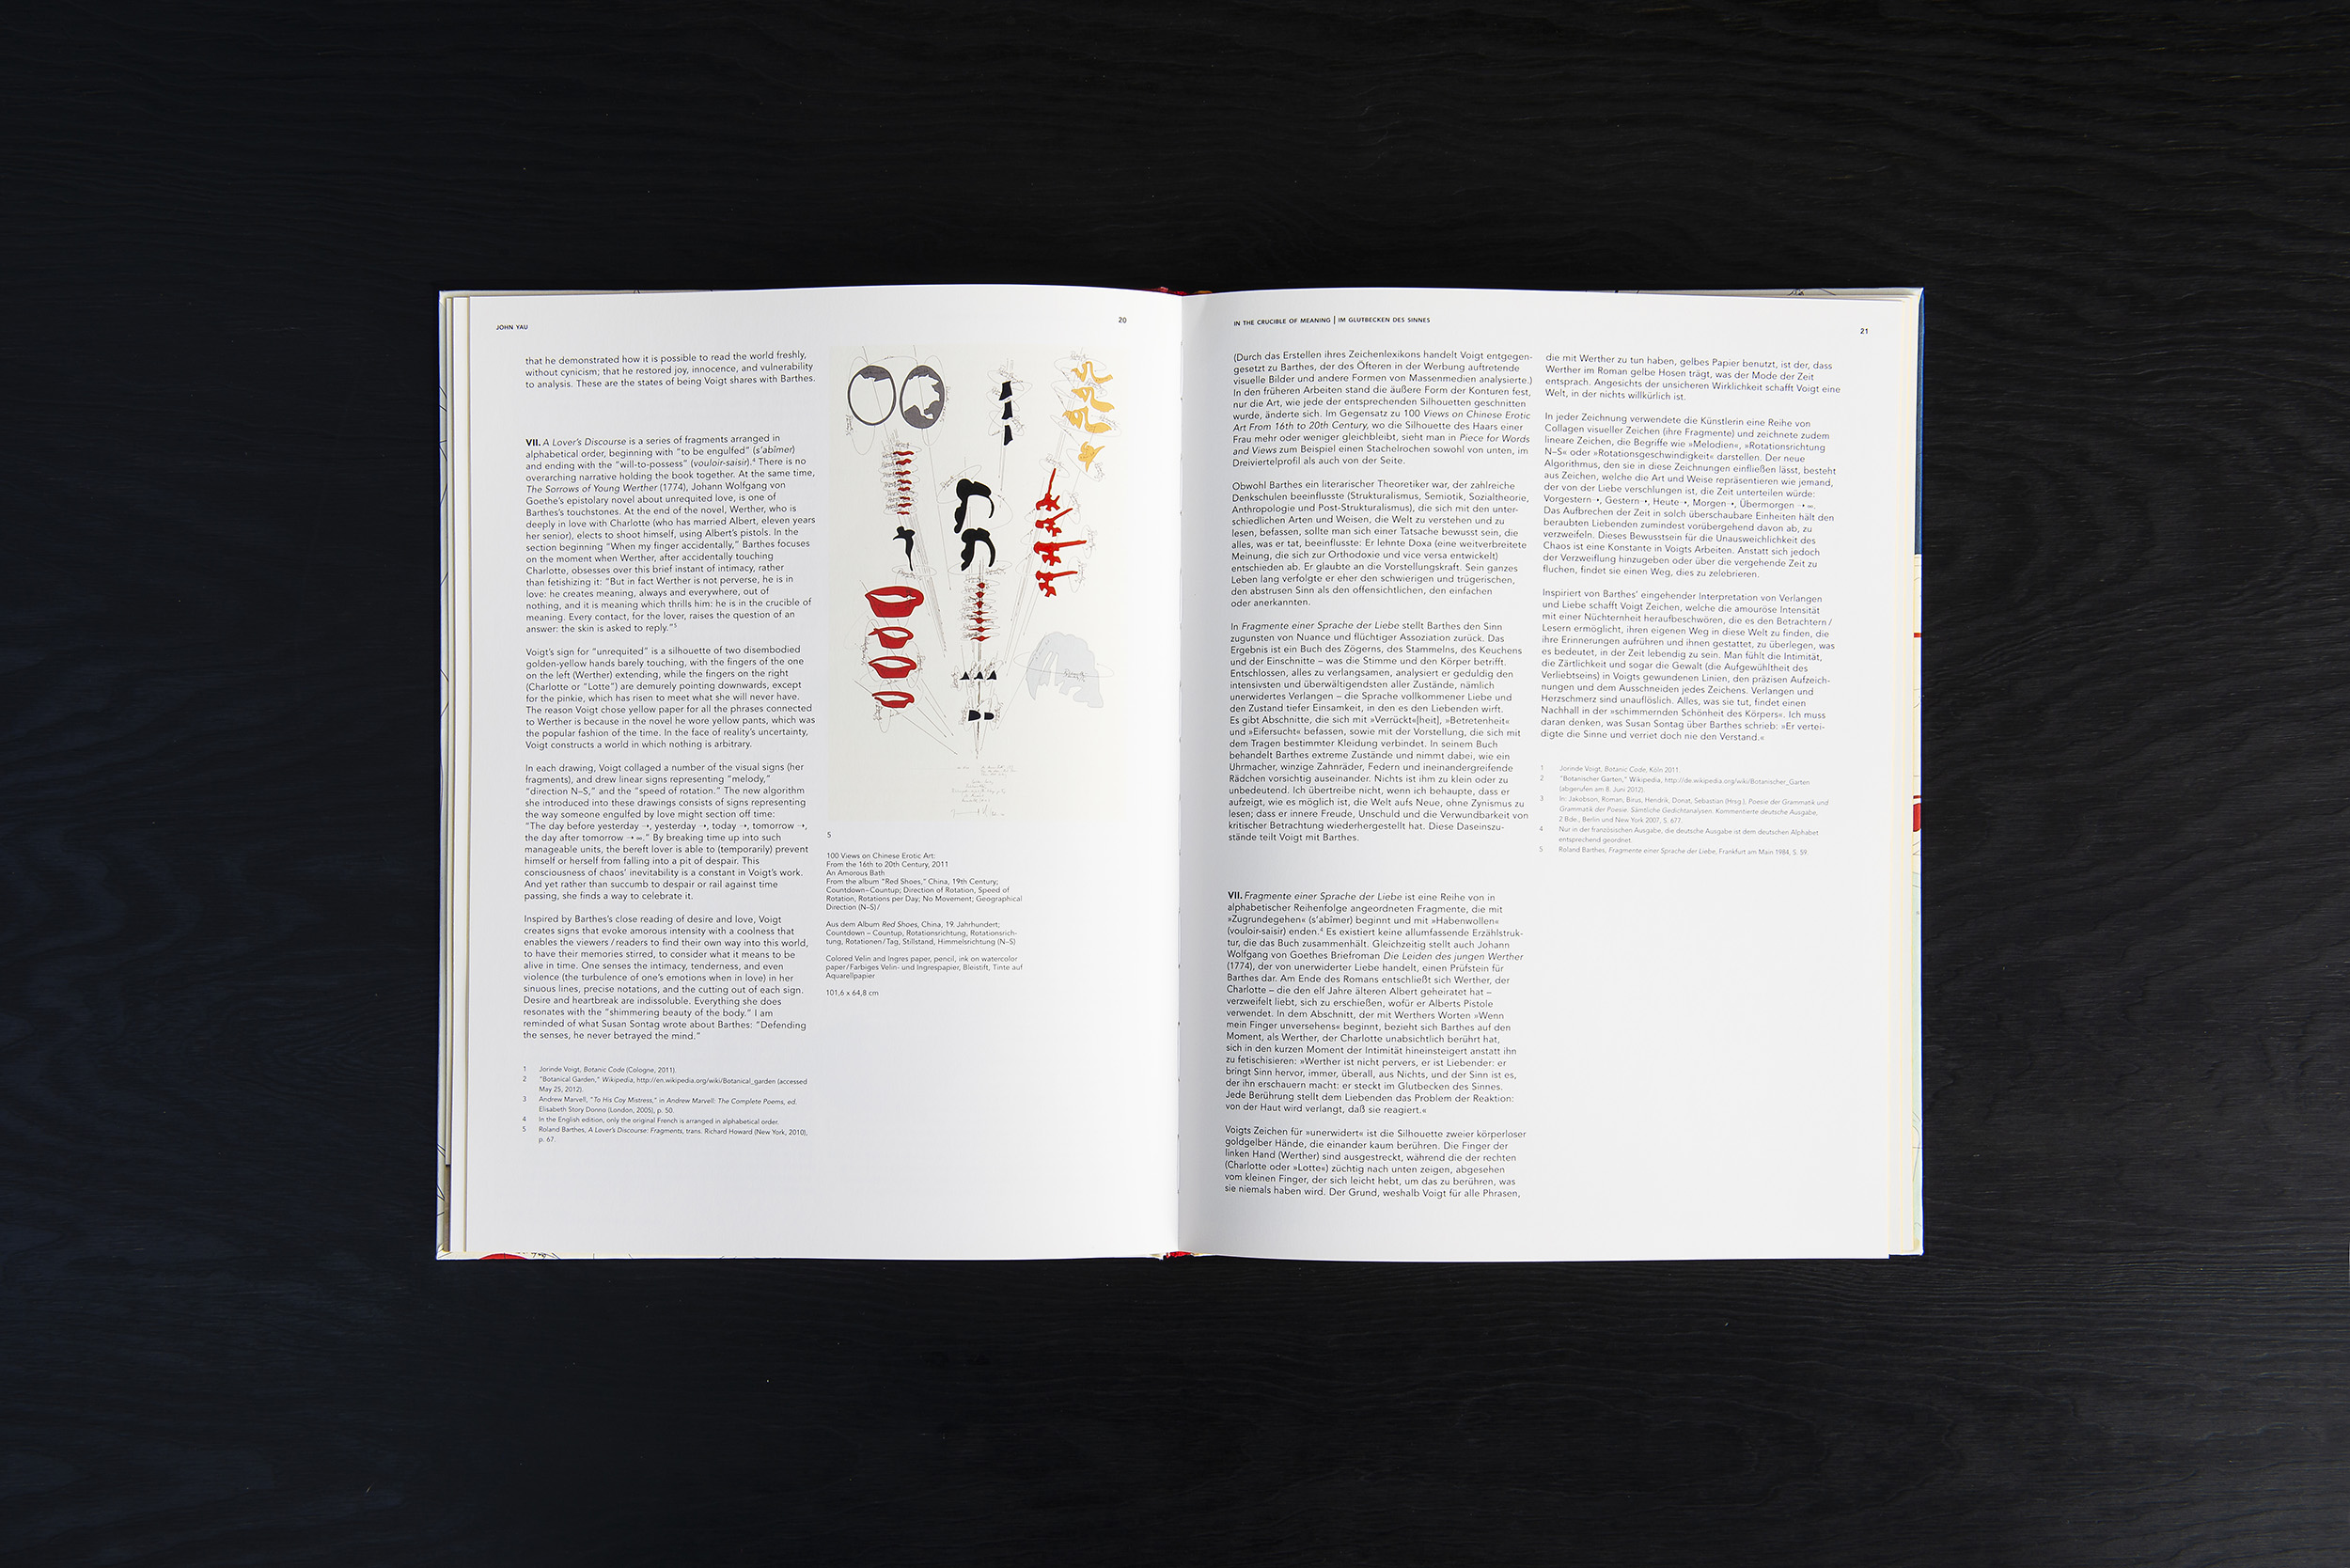 2012 Jorinde Voigt – Piece for Words and Views, Catalog on the occasion of the same entitled exhibition at David Nolan Gallery, New York, Editor: David Nolan, Text: John Yau, Jorinde Voigt, Language: English, German, total pages: 80, Publishing: Hatje Cantz, ISBN 978-3-7757-3473-8, Price: €39,80. inside 3